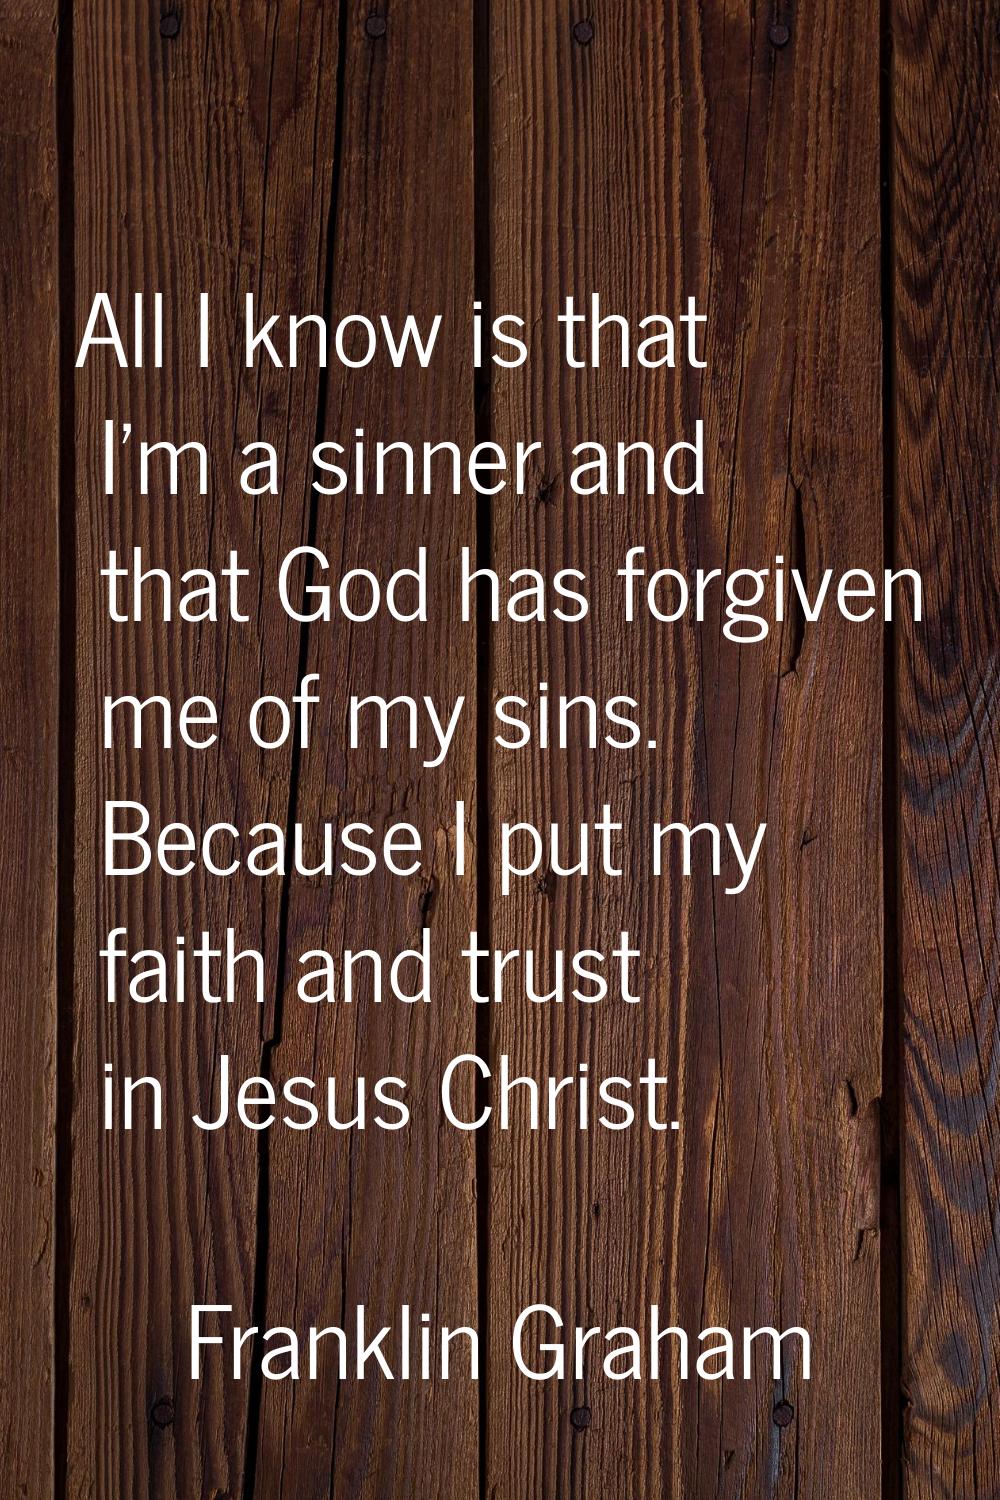 All I know is that I'm a sinner and that God has forgiven me of my sins. Because I put my faith and